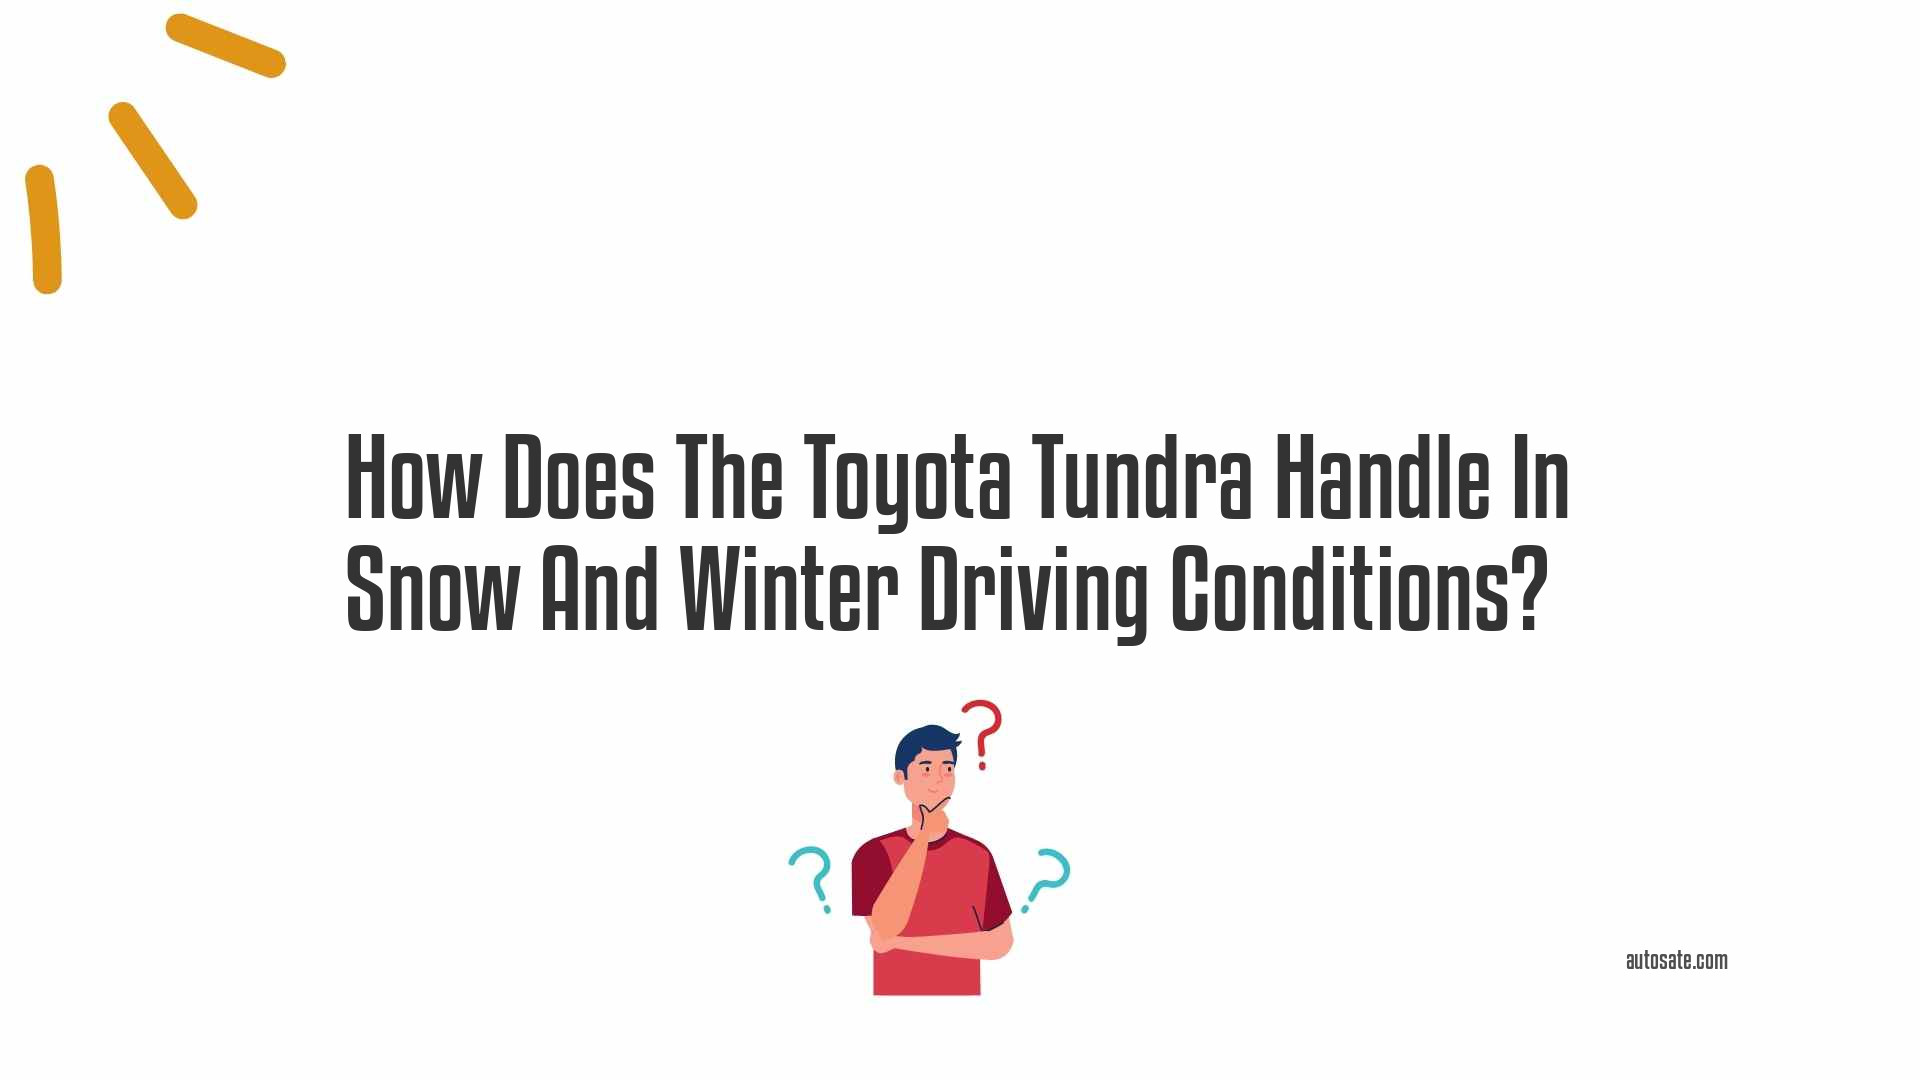 How Does The Toyota Tundra Handle In Snow And Winter Driving Conditions?